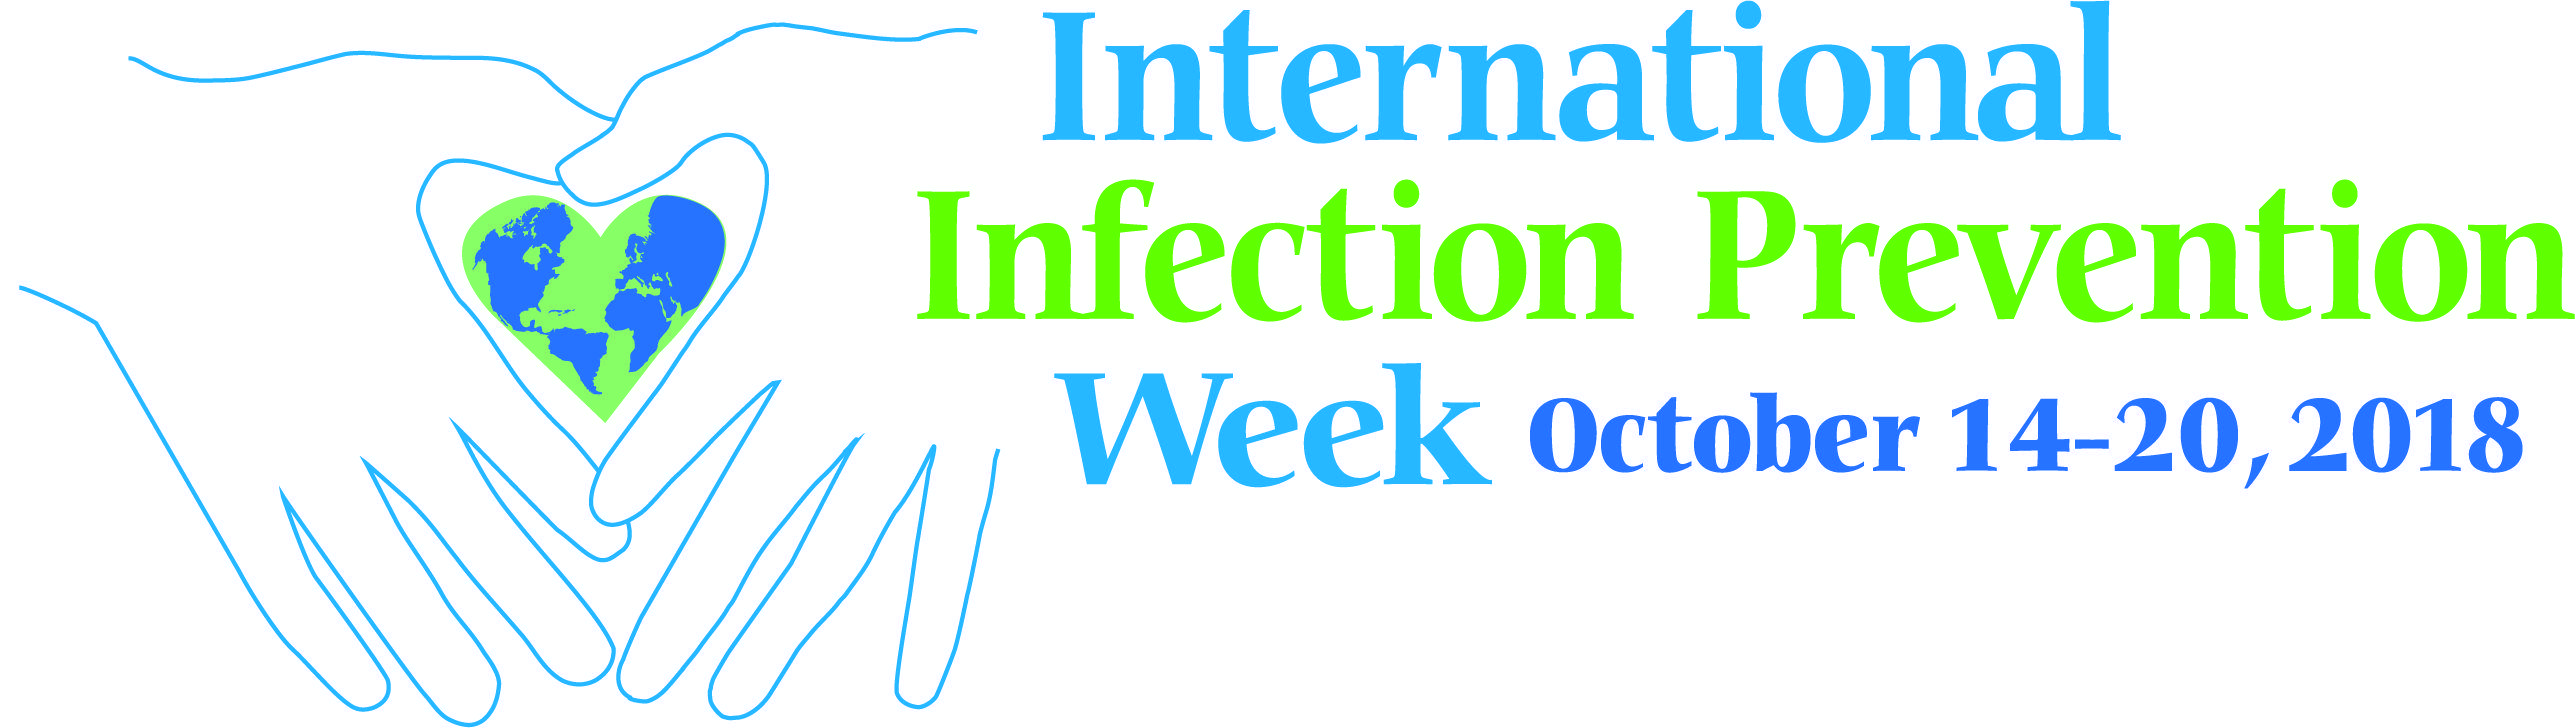 Prevention Logo - Logos and Images - Infection Prevention and You